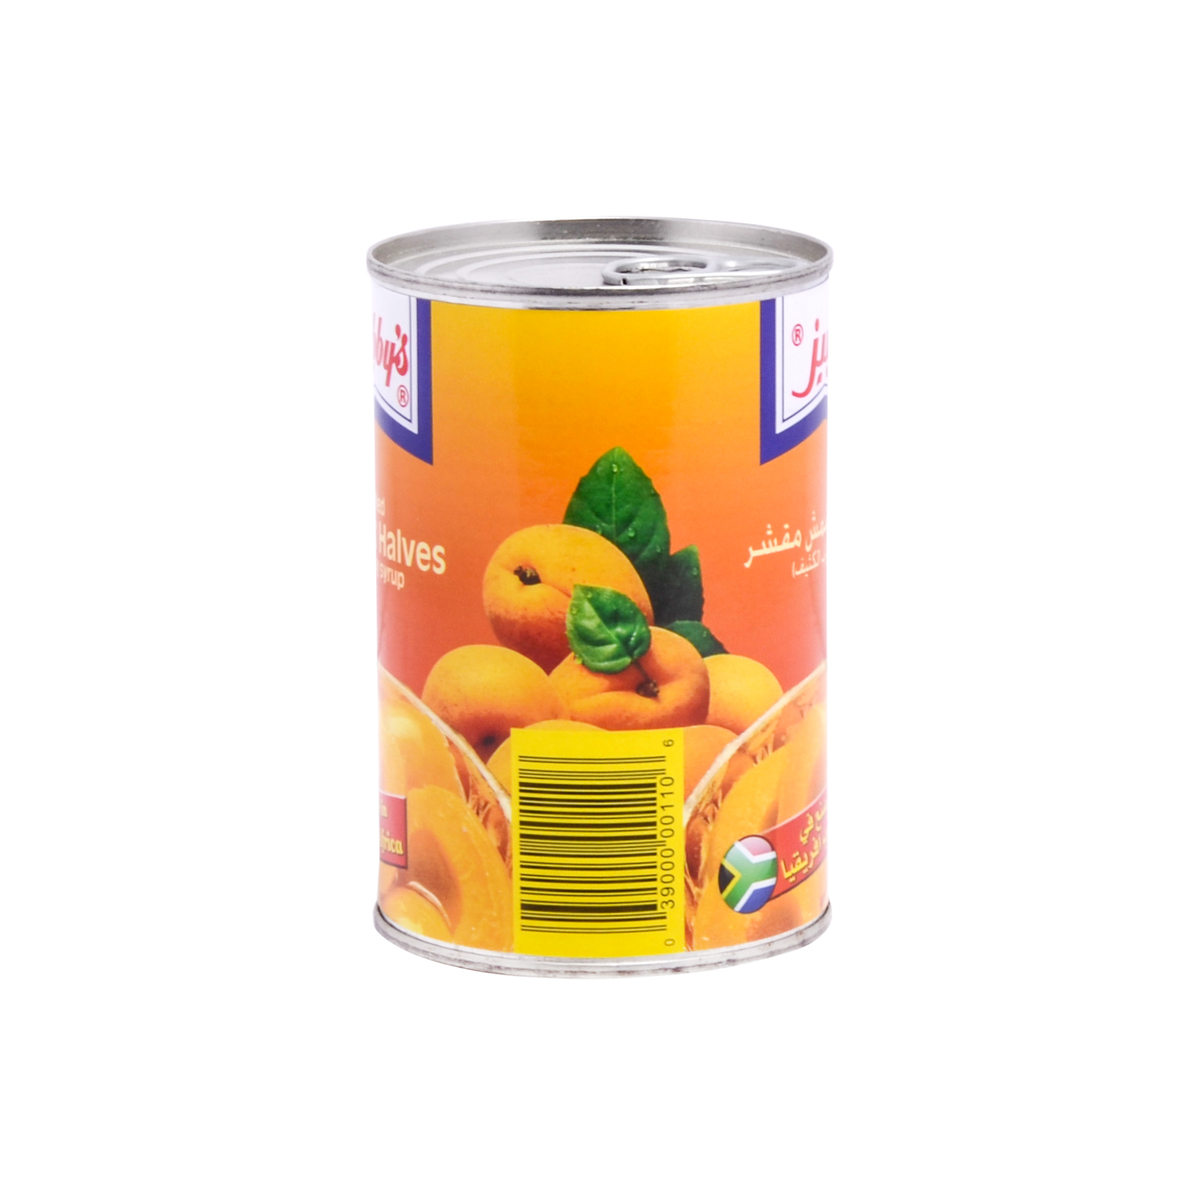 Libby's Peeled Apricot Halves in Heavy Syrup 420g